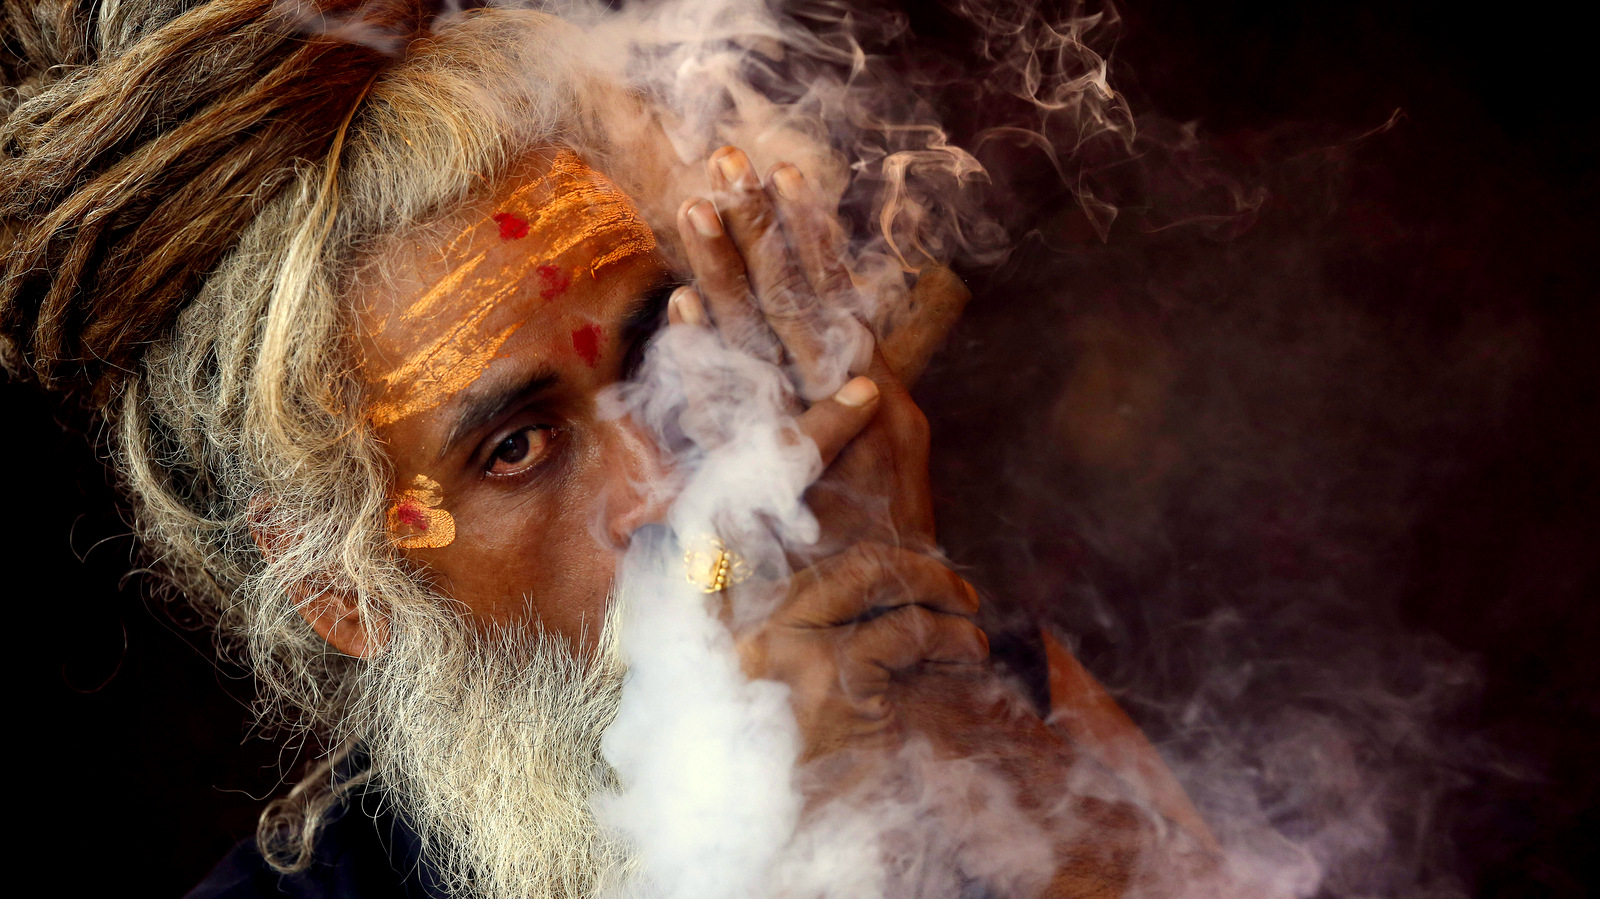 A Naga sadhu, or naked Hindu holy man, smokes hashish inside his tent during Kumbh Mela, or Pitcher festival, at Trimbakeshwar, India, Friday, Aug. 28, 2015. Hindus believe taking a dip in the waters of a holy river during the festival will cleanse them of their sins. The festival is held four times every 12 years. (AP Photo/Rajanish Kakade)